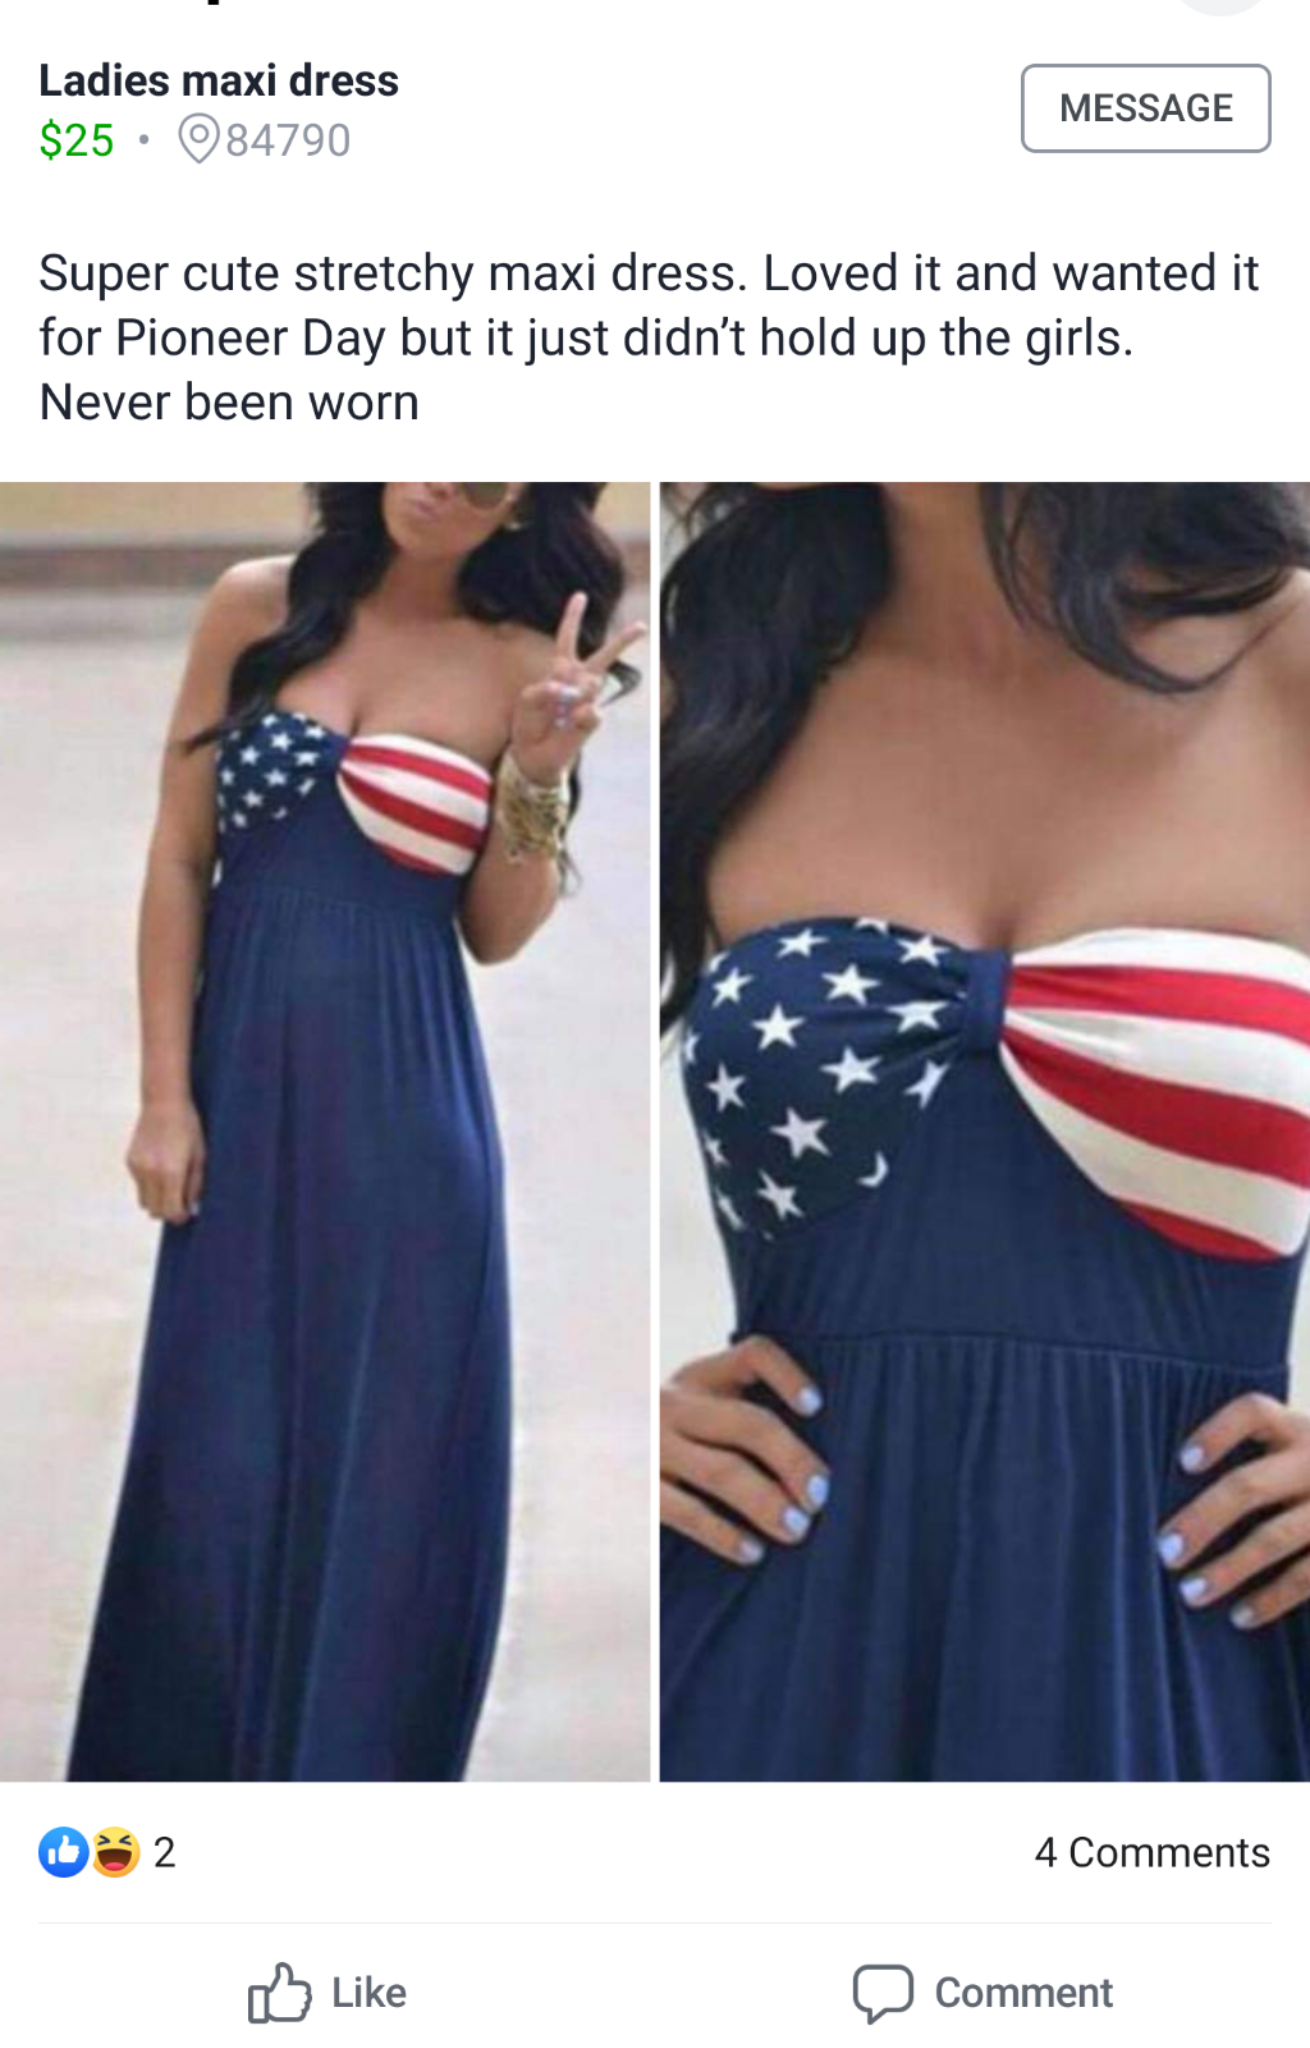 american flag dresses Ladies maxi dress $25. 84790 Message Super cute stretchy maxi dress. Loved it and wanted it for Pioneer Day but it just didn't hold up the girls. Never been worn